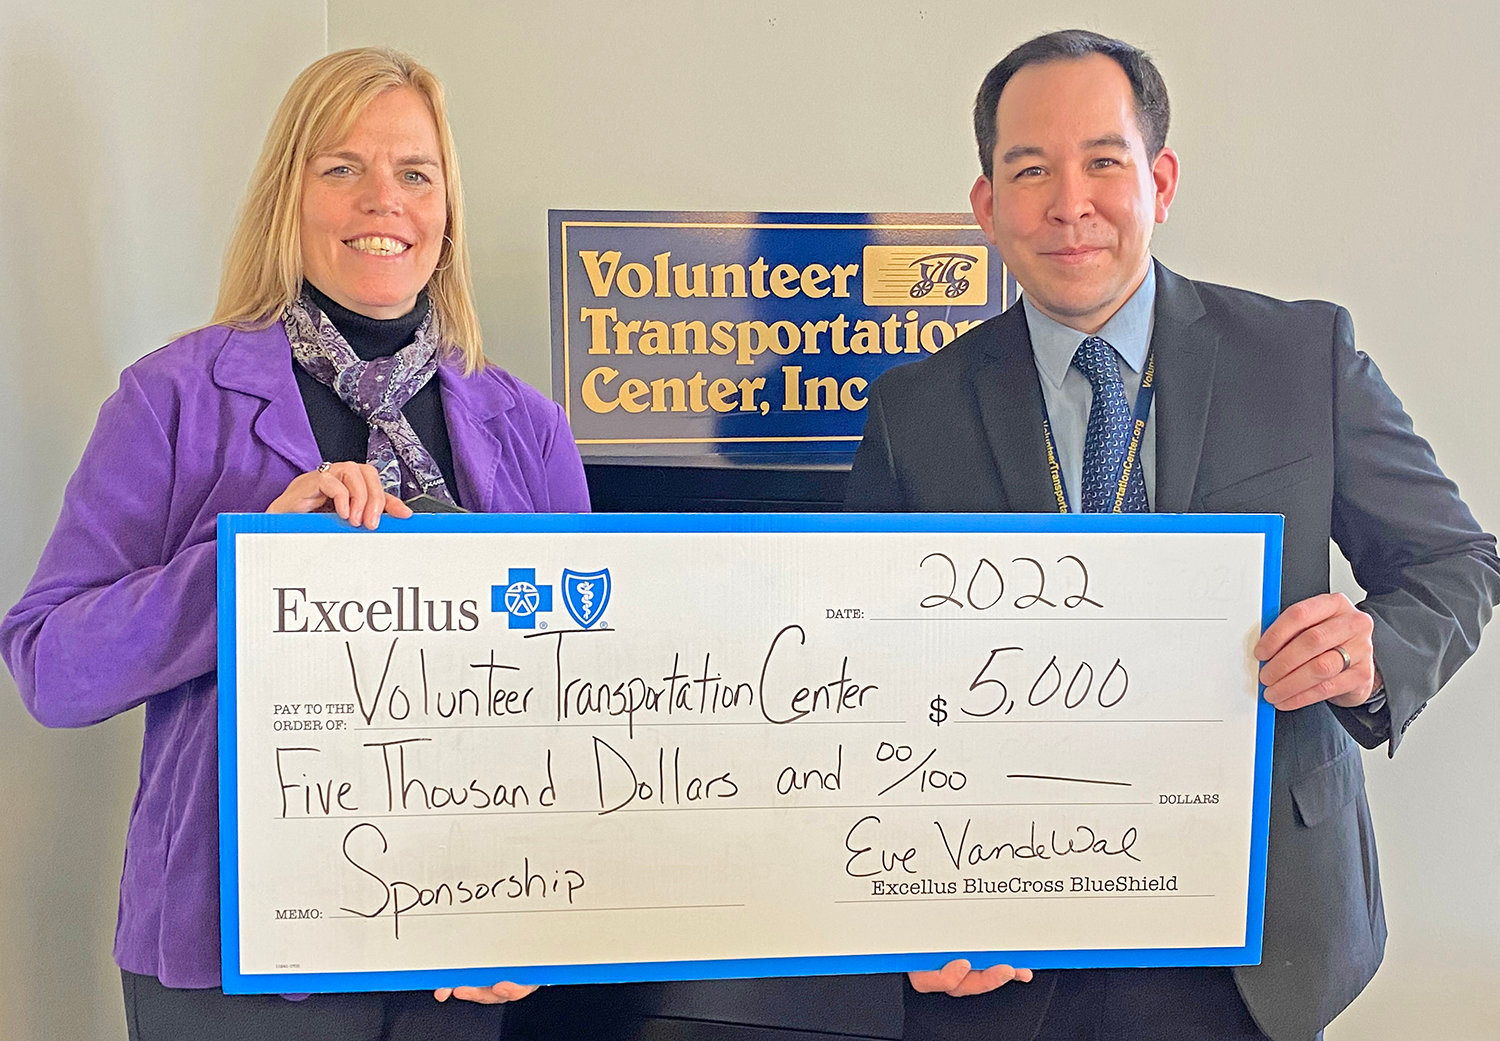 OVERCOMING TRANSPORTATION BARRIERS — Jeremiah S. Papineau, foundation director for the Volunteer Transportation Center, Inc., holds a ceremonial check with Eve Van de Wal, Excellus BlueCross BlueShield Utica regional president. The health plan awarded the VTC $5,000 in support of the services provided to people in the community facing transportation barriers.